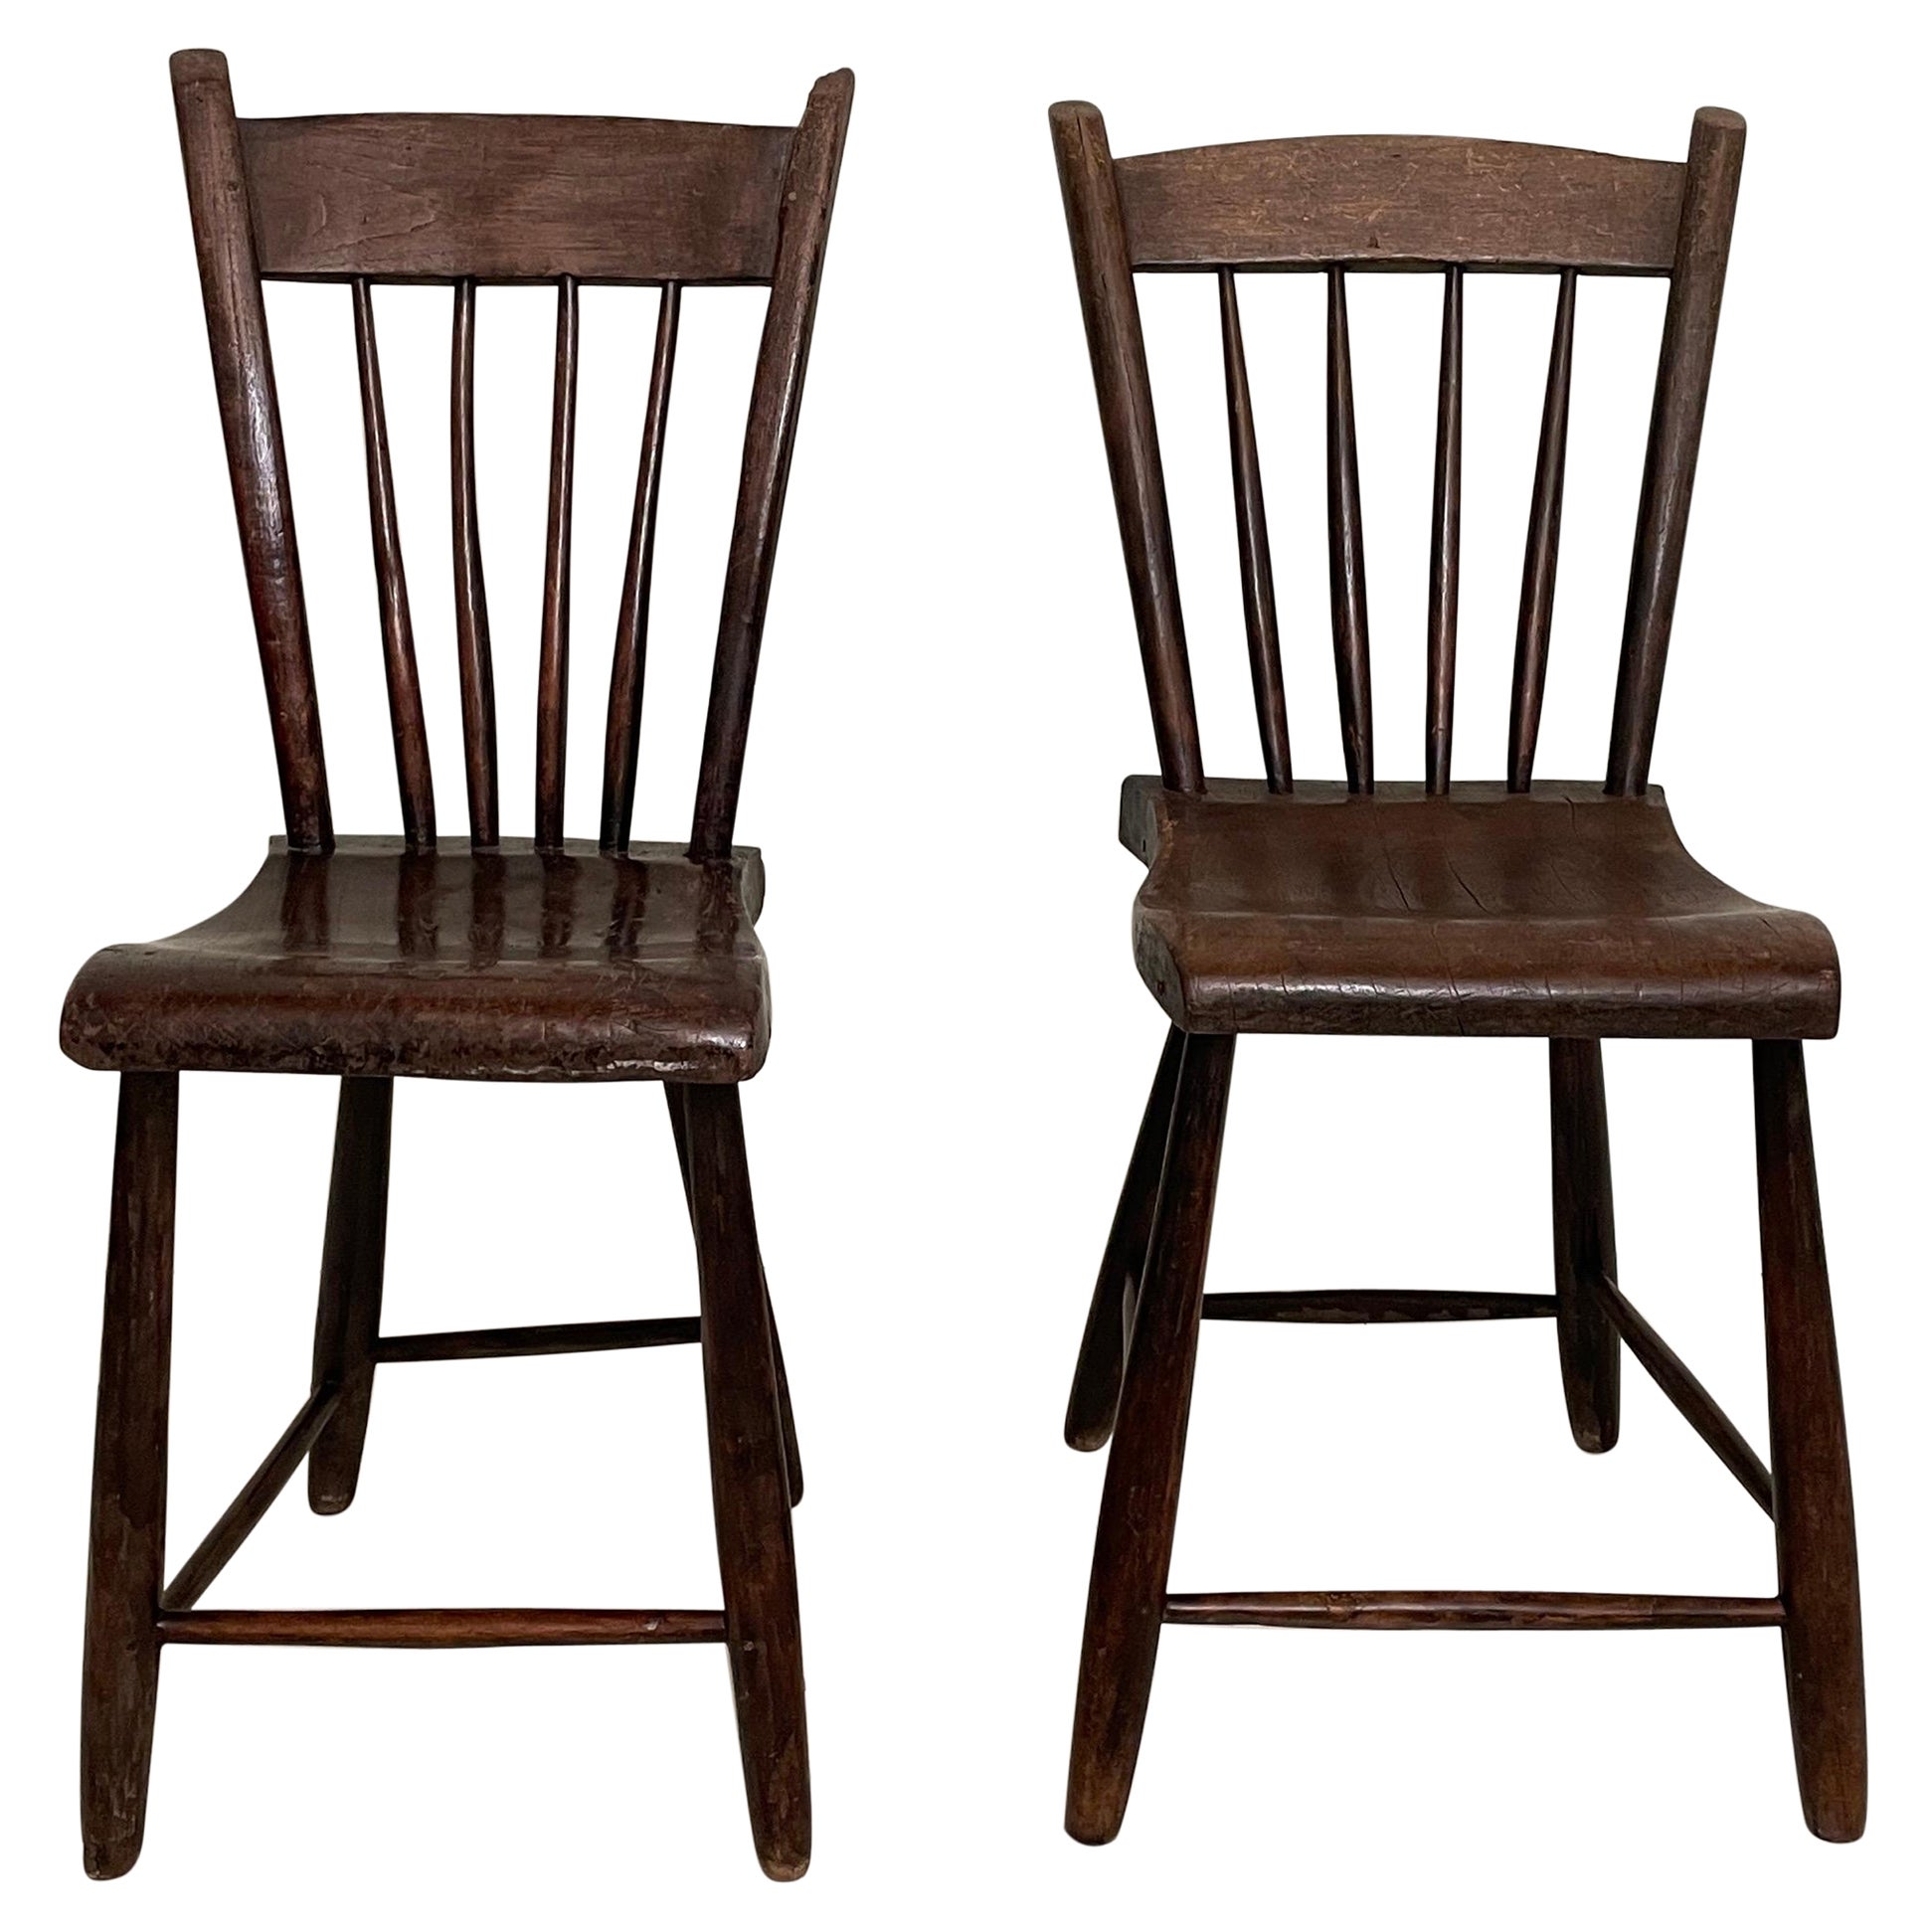 Pair of French Wabi-Sabi Country Chairs in Elm, Around 1830